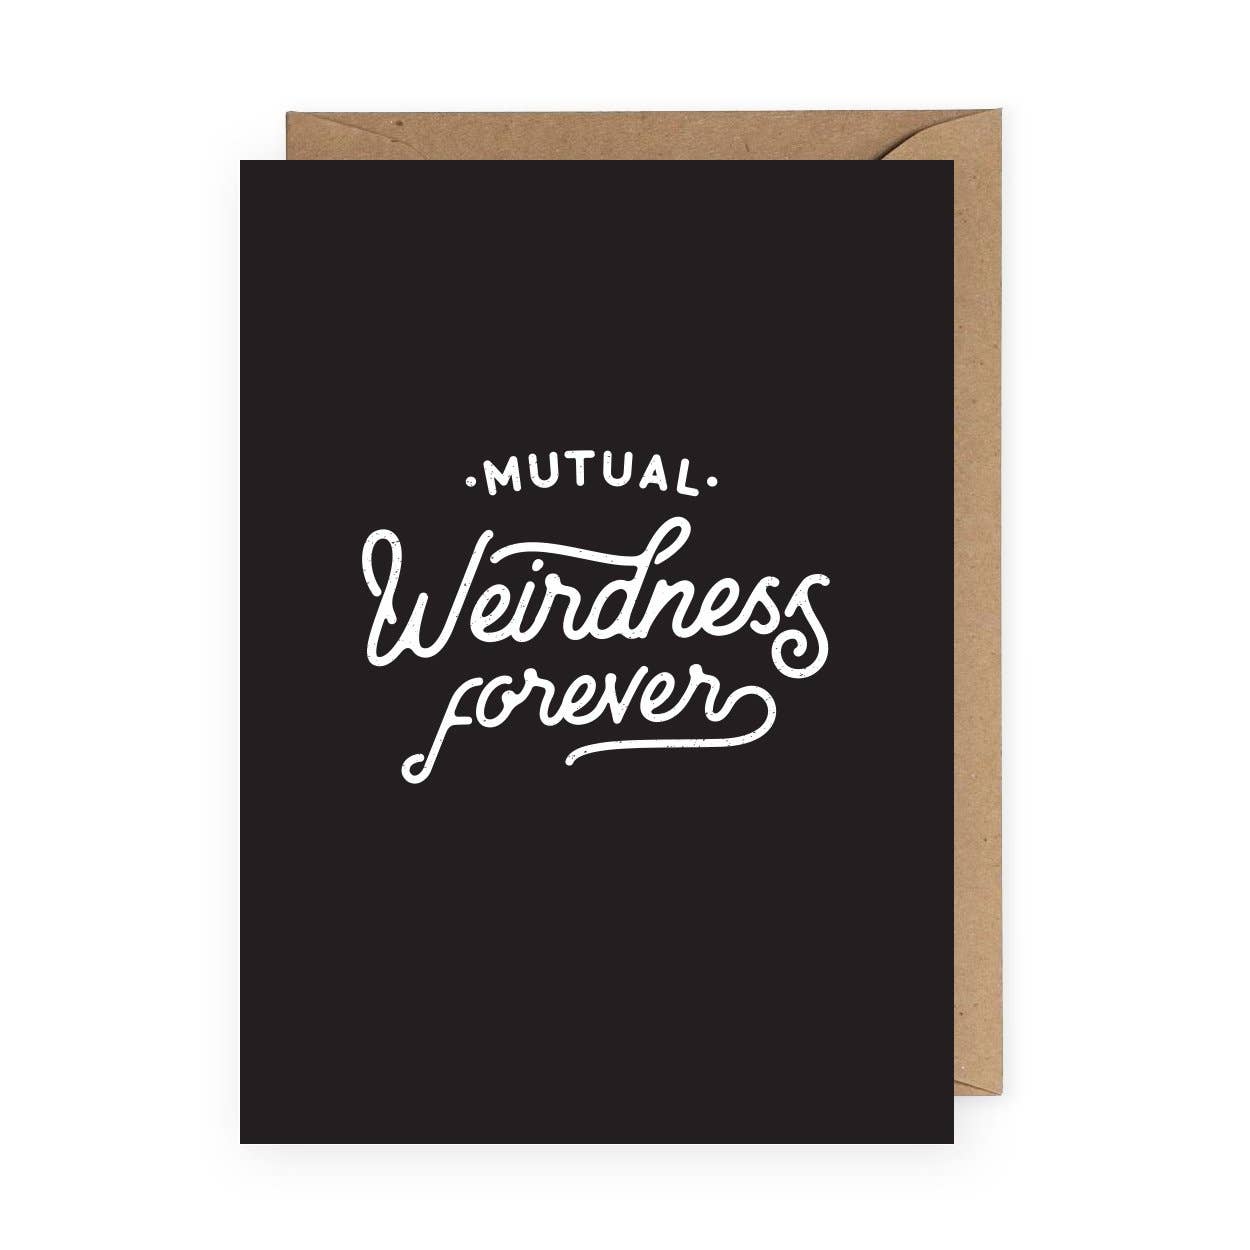 Mutual Weirdness Forever Greeting Card - PaperGeenius